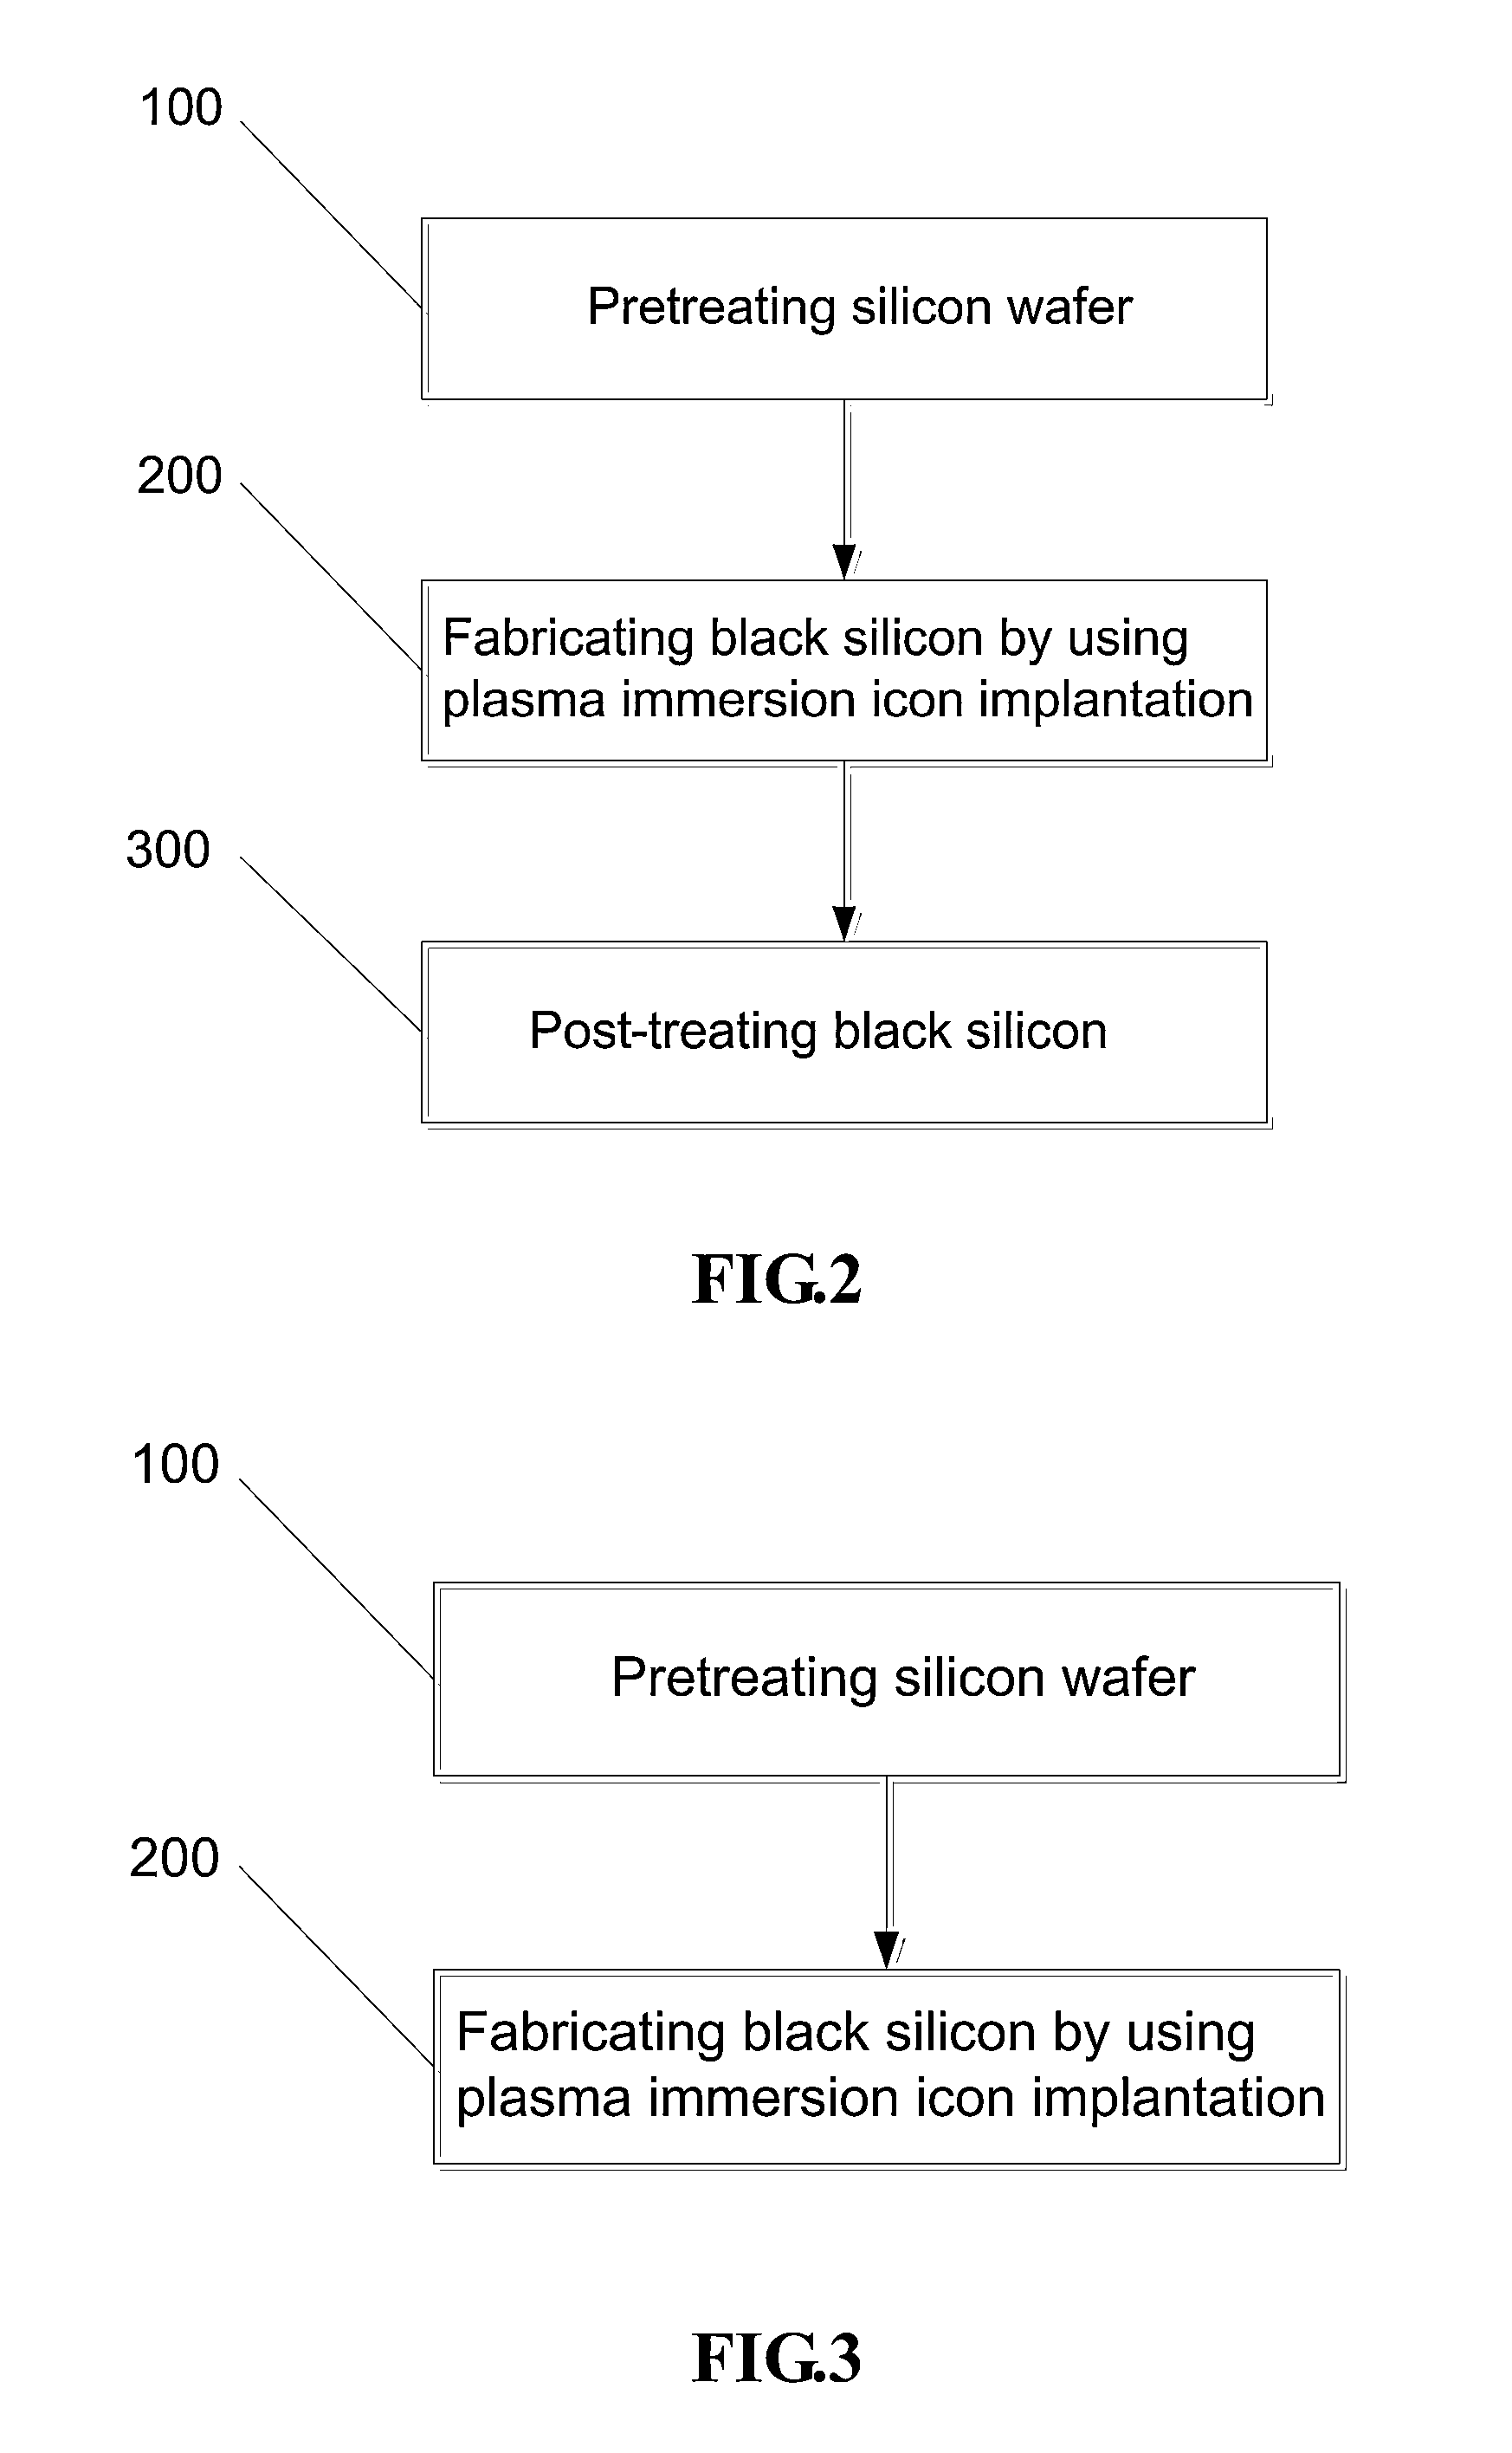 Method for Fabricating Black Silicon by Using Plasma Immersion Ion Implantation